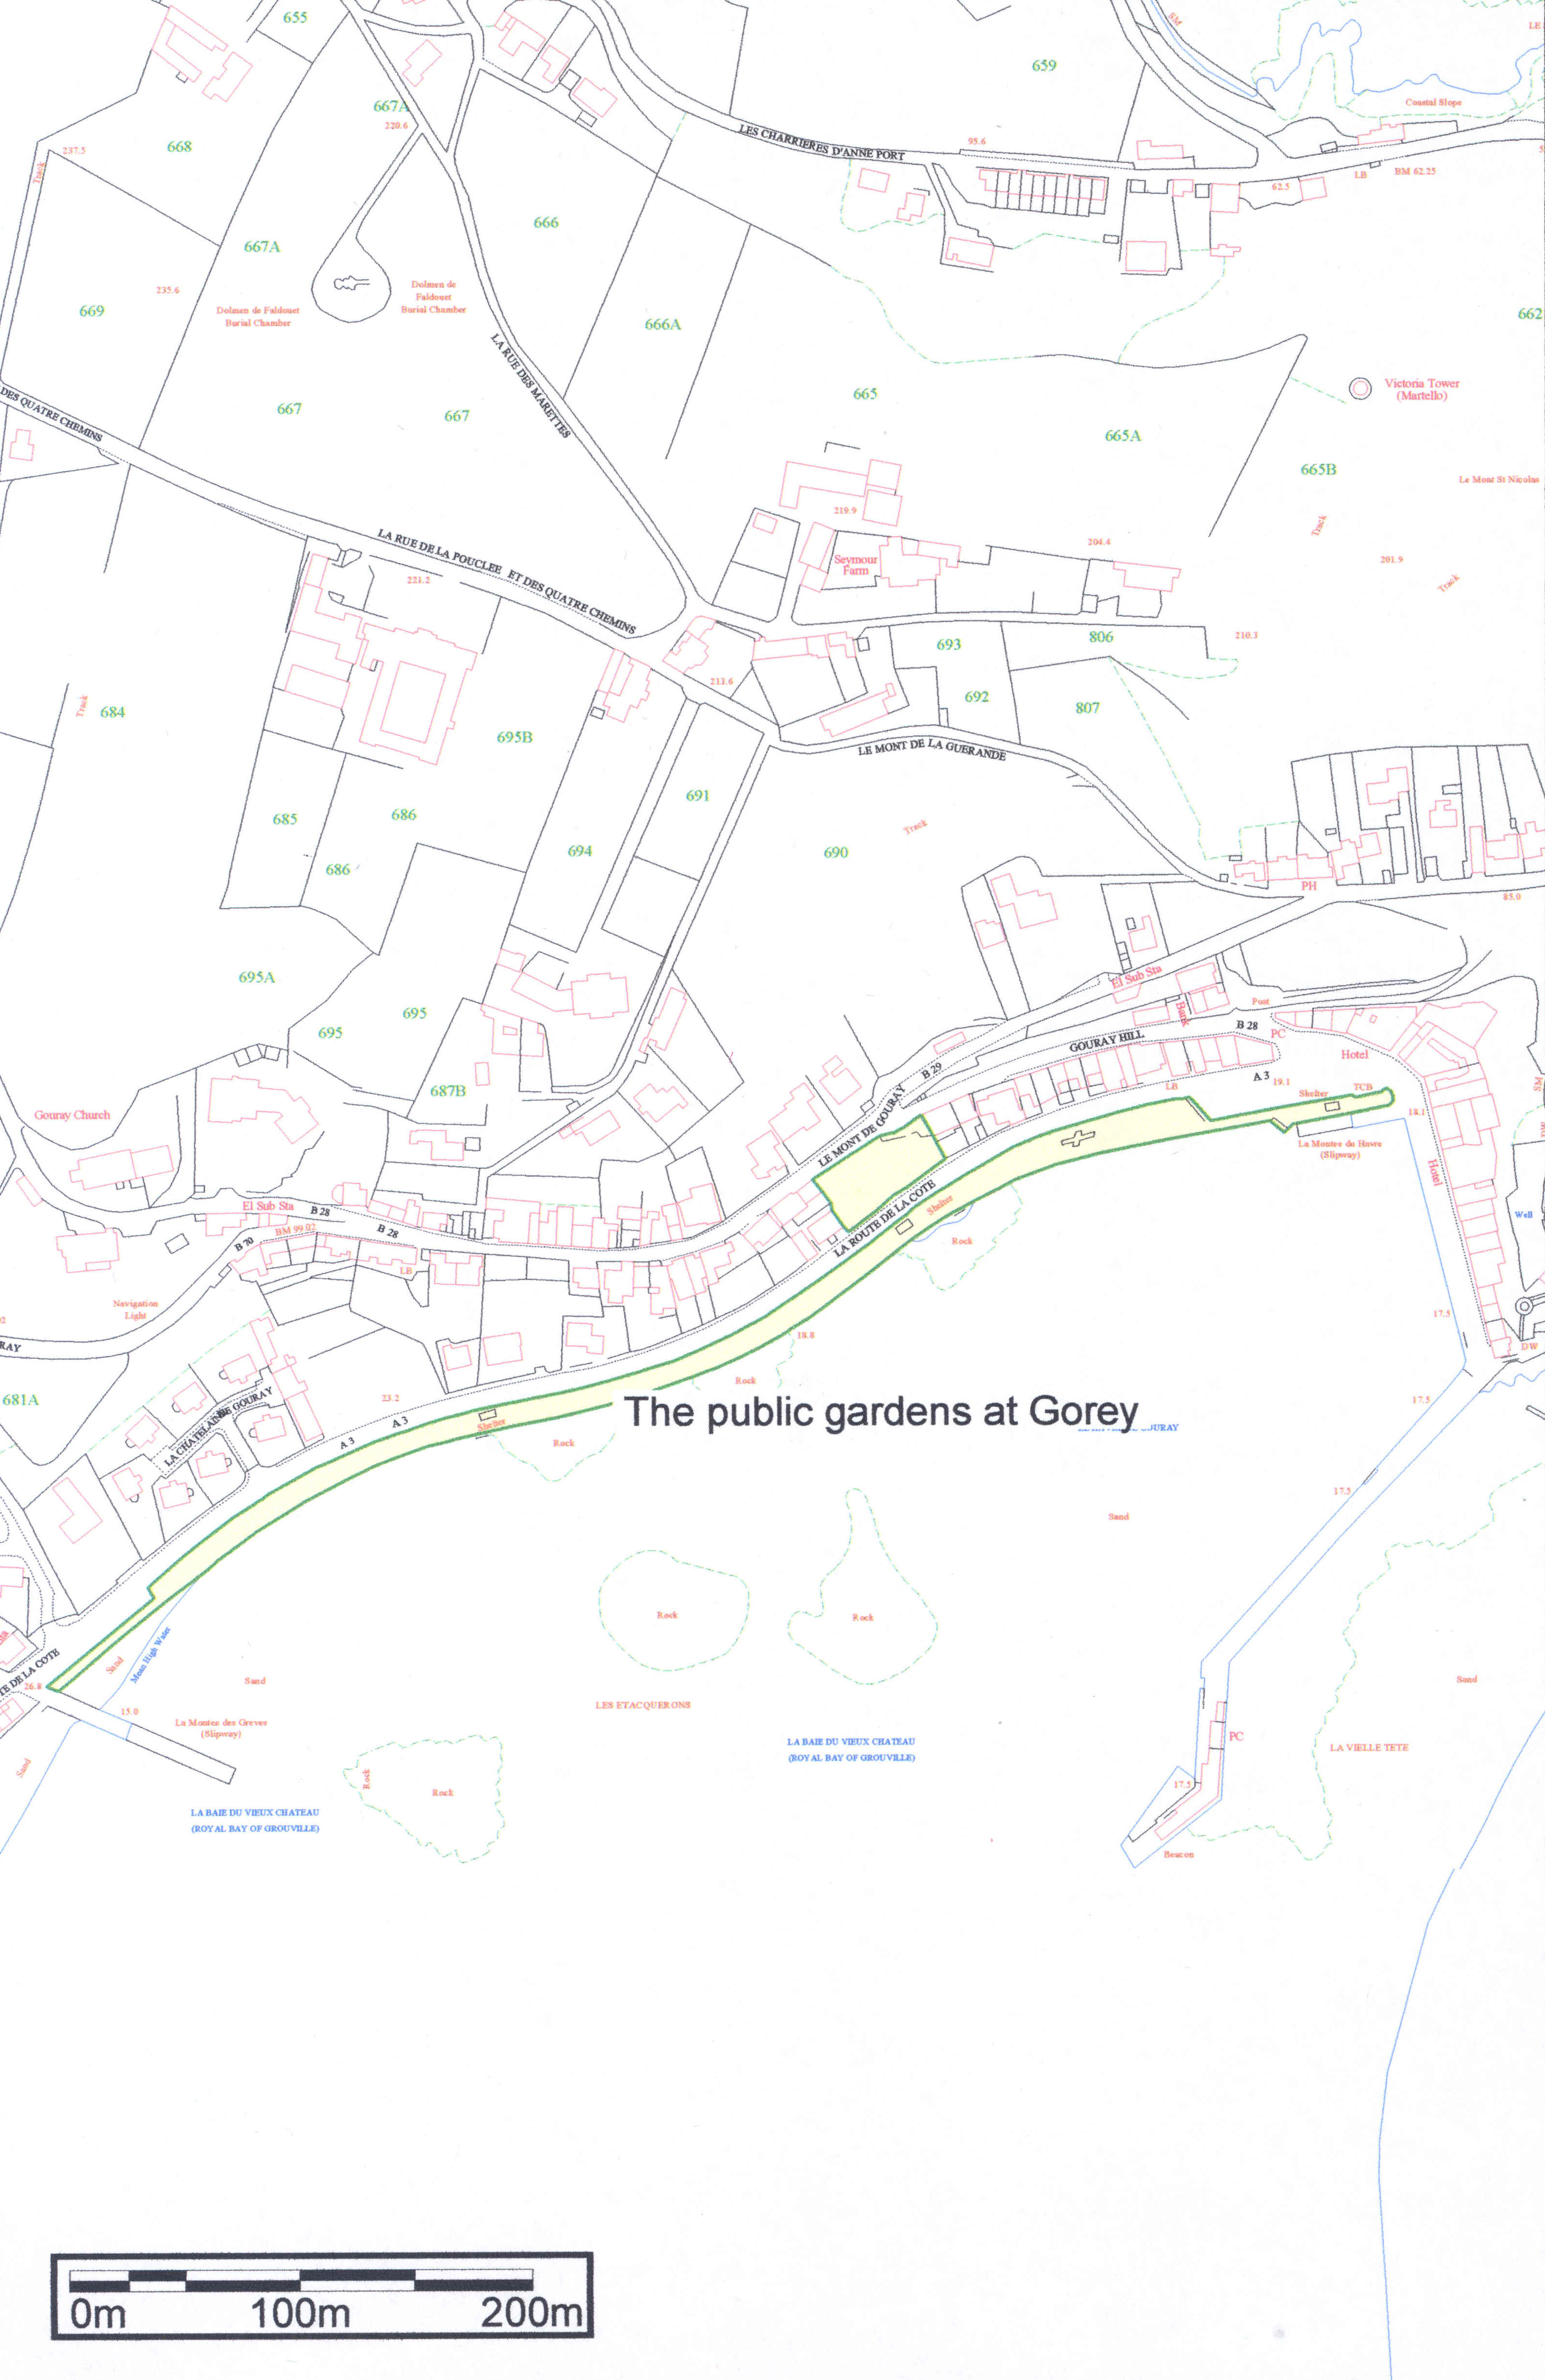 Part 2 - map of the public gardens at Gorey